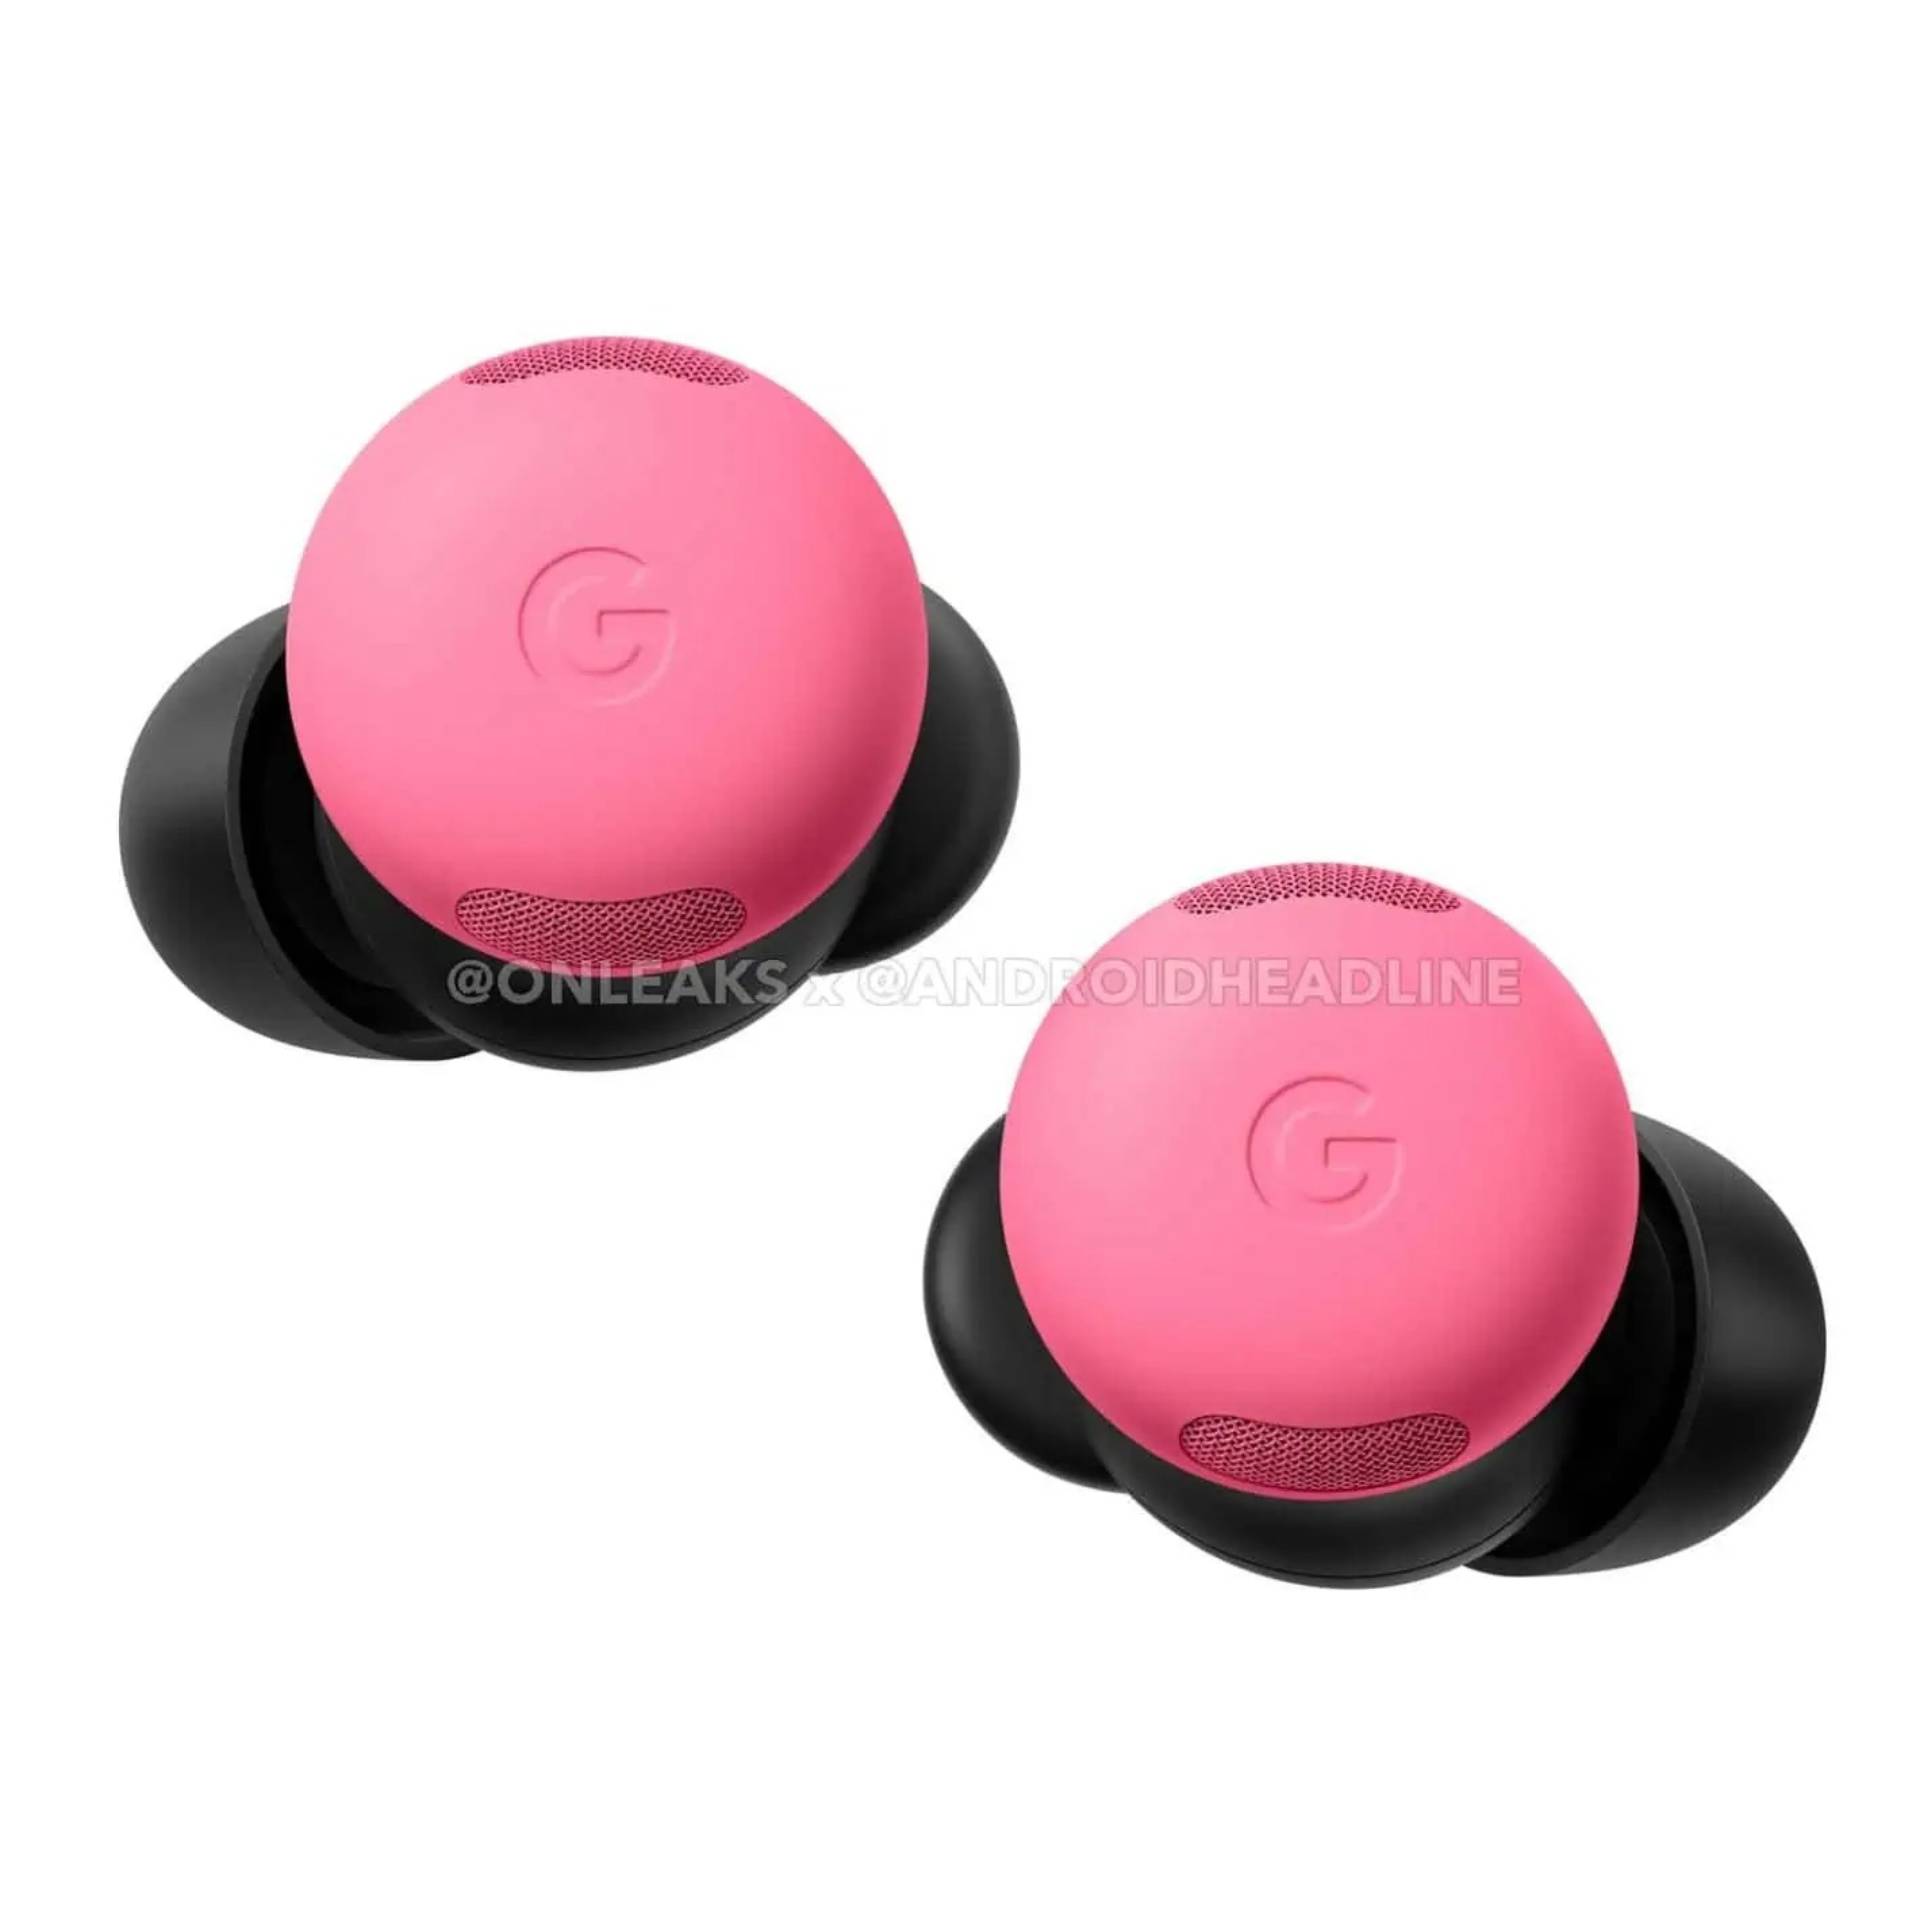 Leaked render of the pink Pixel Buds Pro 2 earbuds on white background.